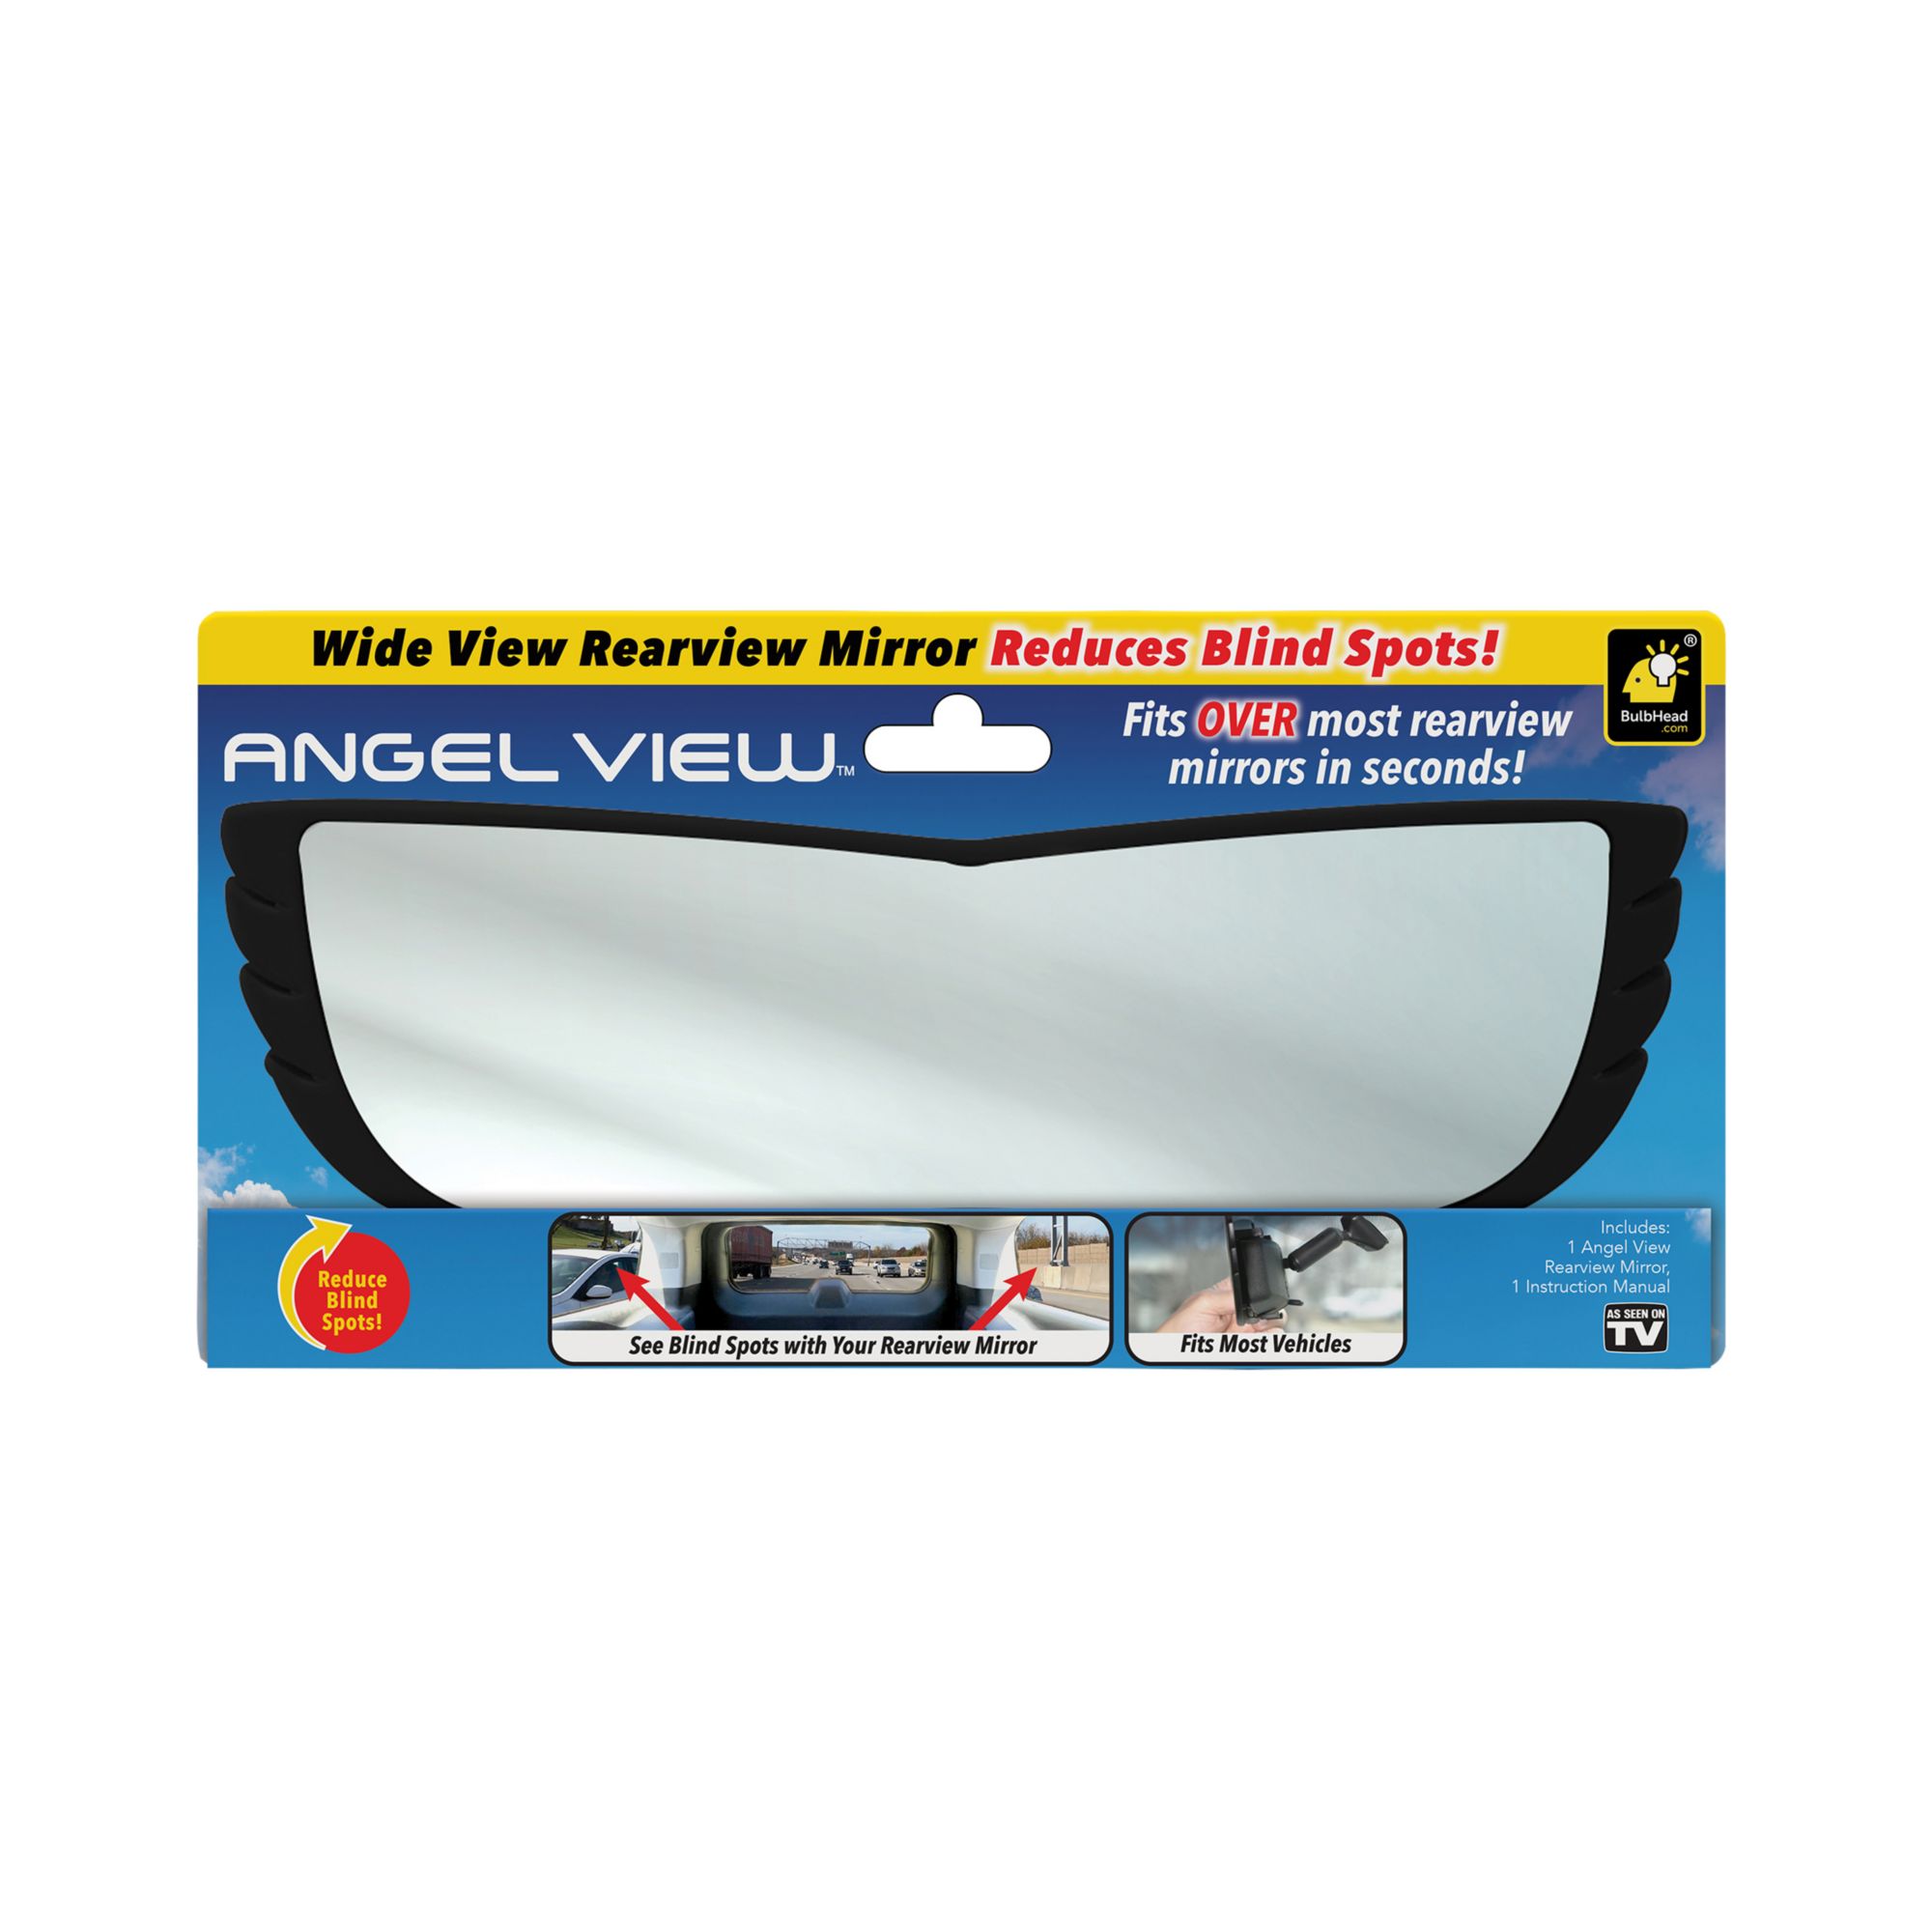 Angel View Mirror Review: As Seen on TV Rearview Mirror - Freakin' Reviews